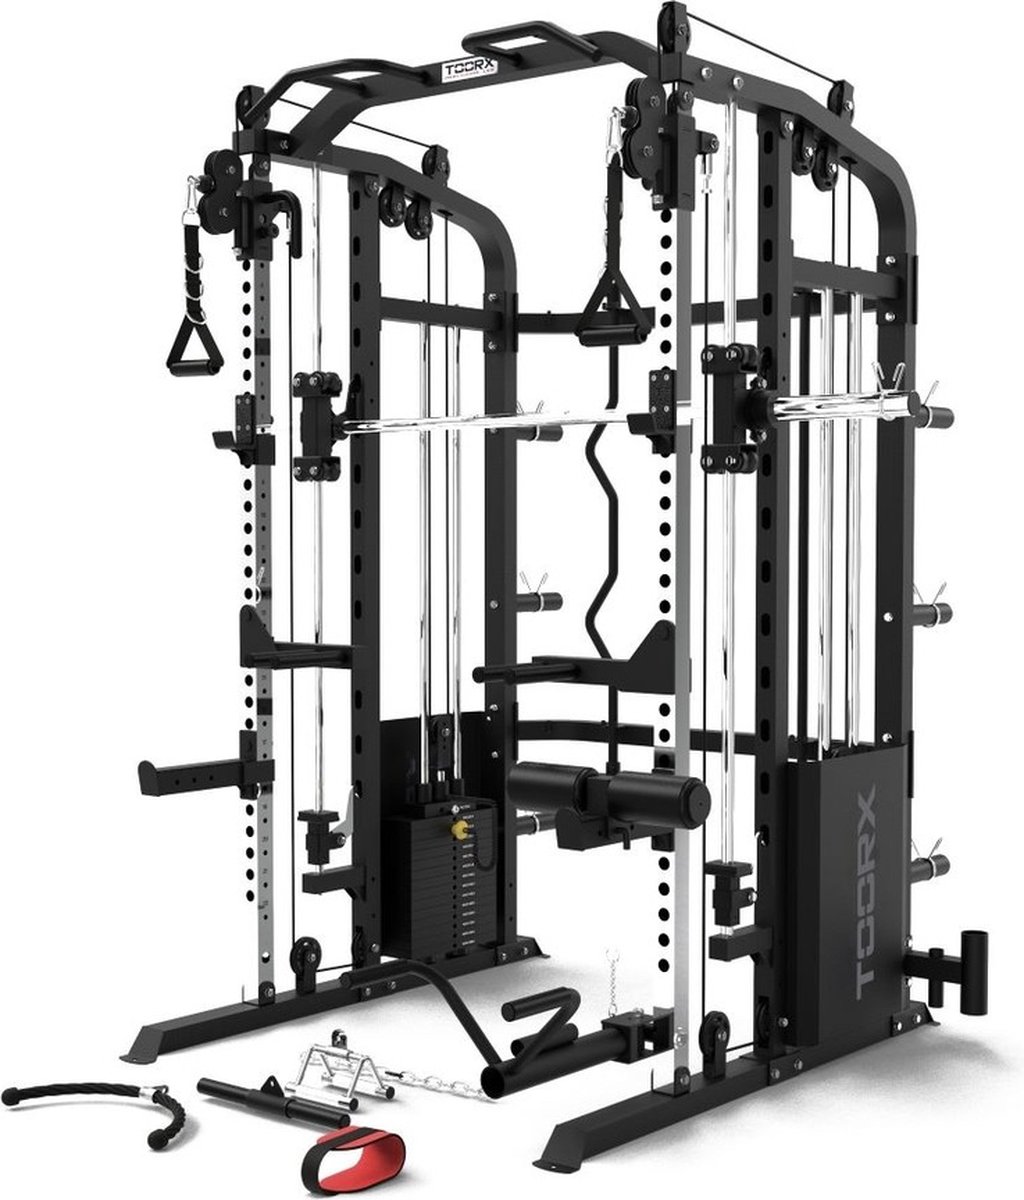 Toorx Professional 3-in-1 Multifunctional Smith Machine - Power Rack ASX-4000 Full Option